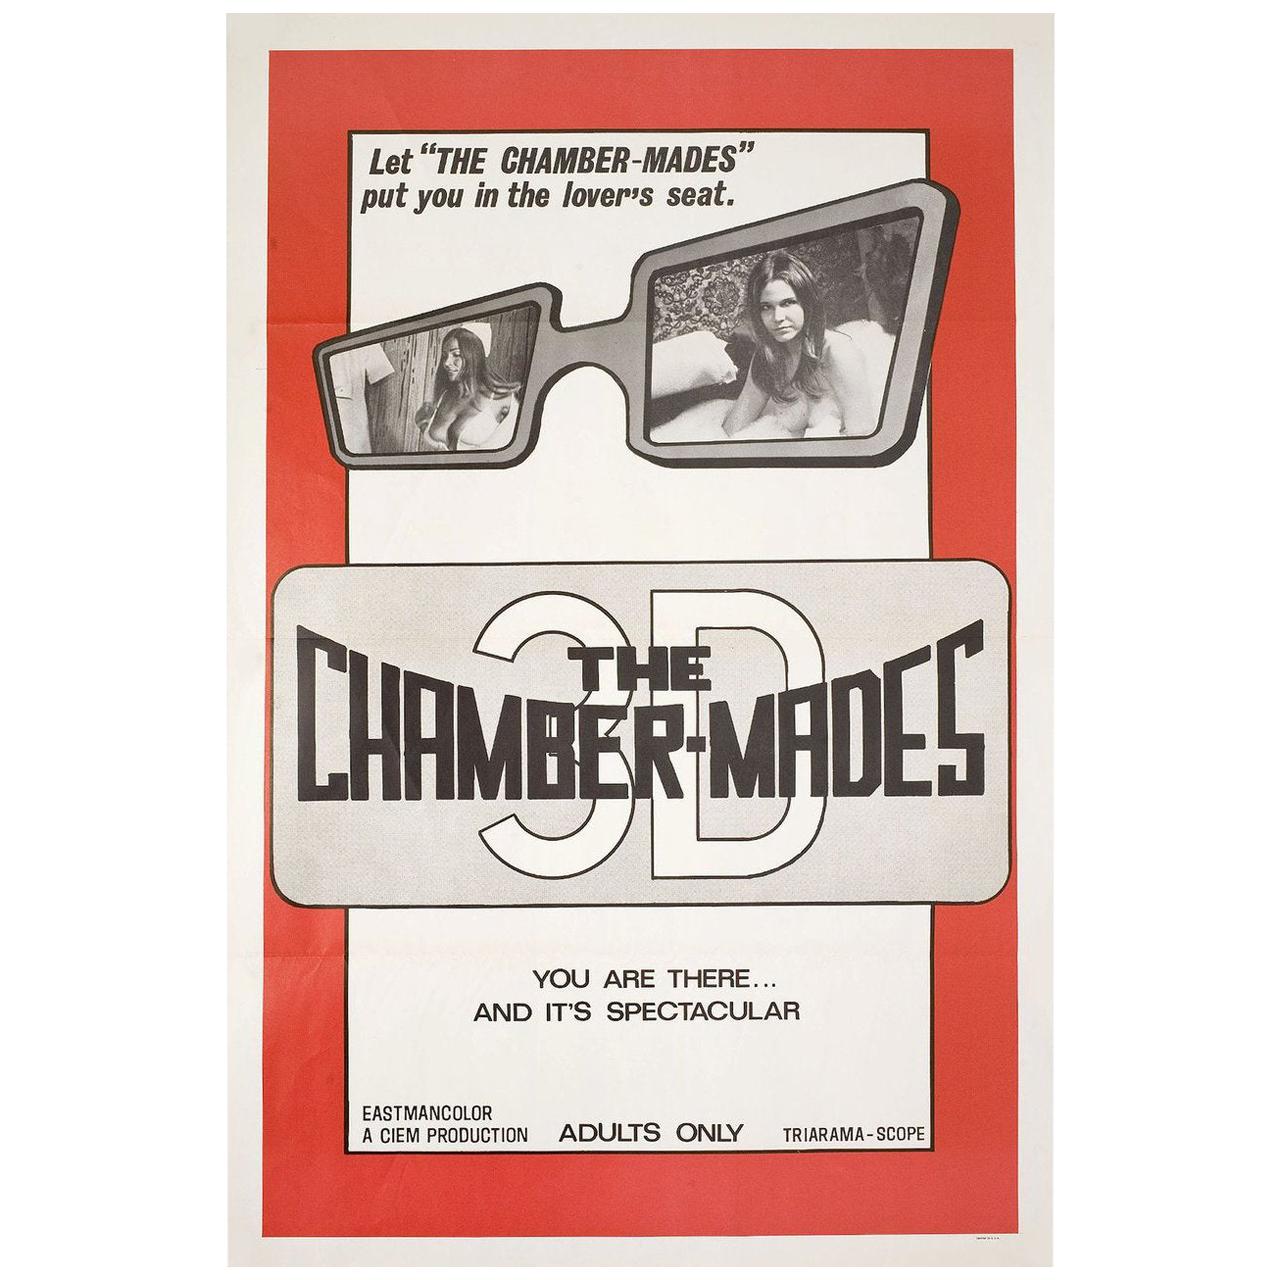 "The Chamber-Mades" 1975 U.S. One Sheet Film Poster